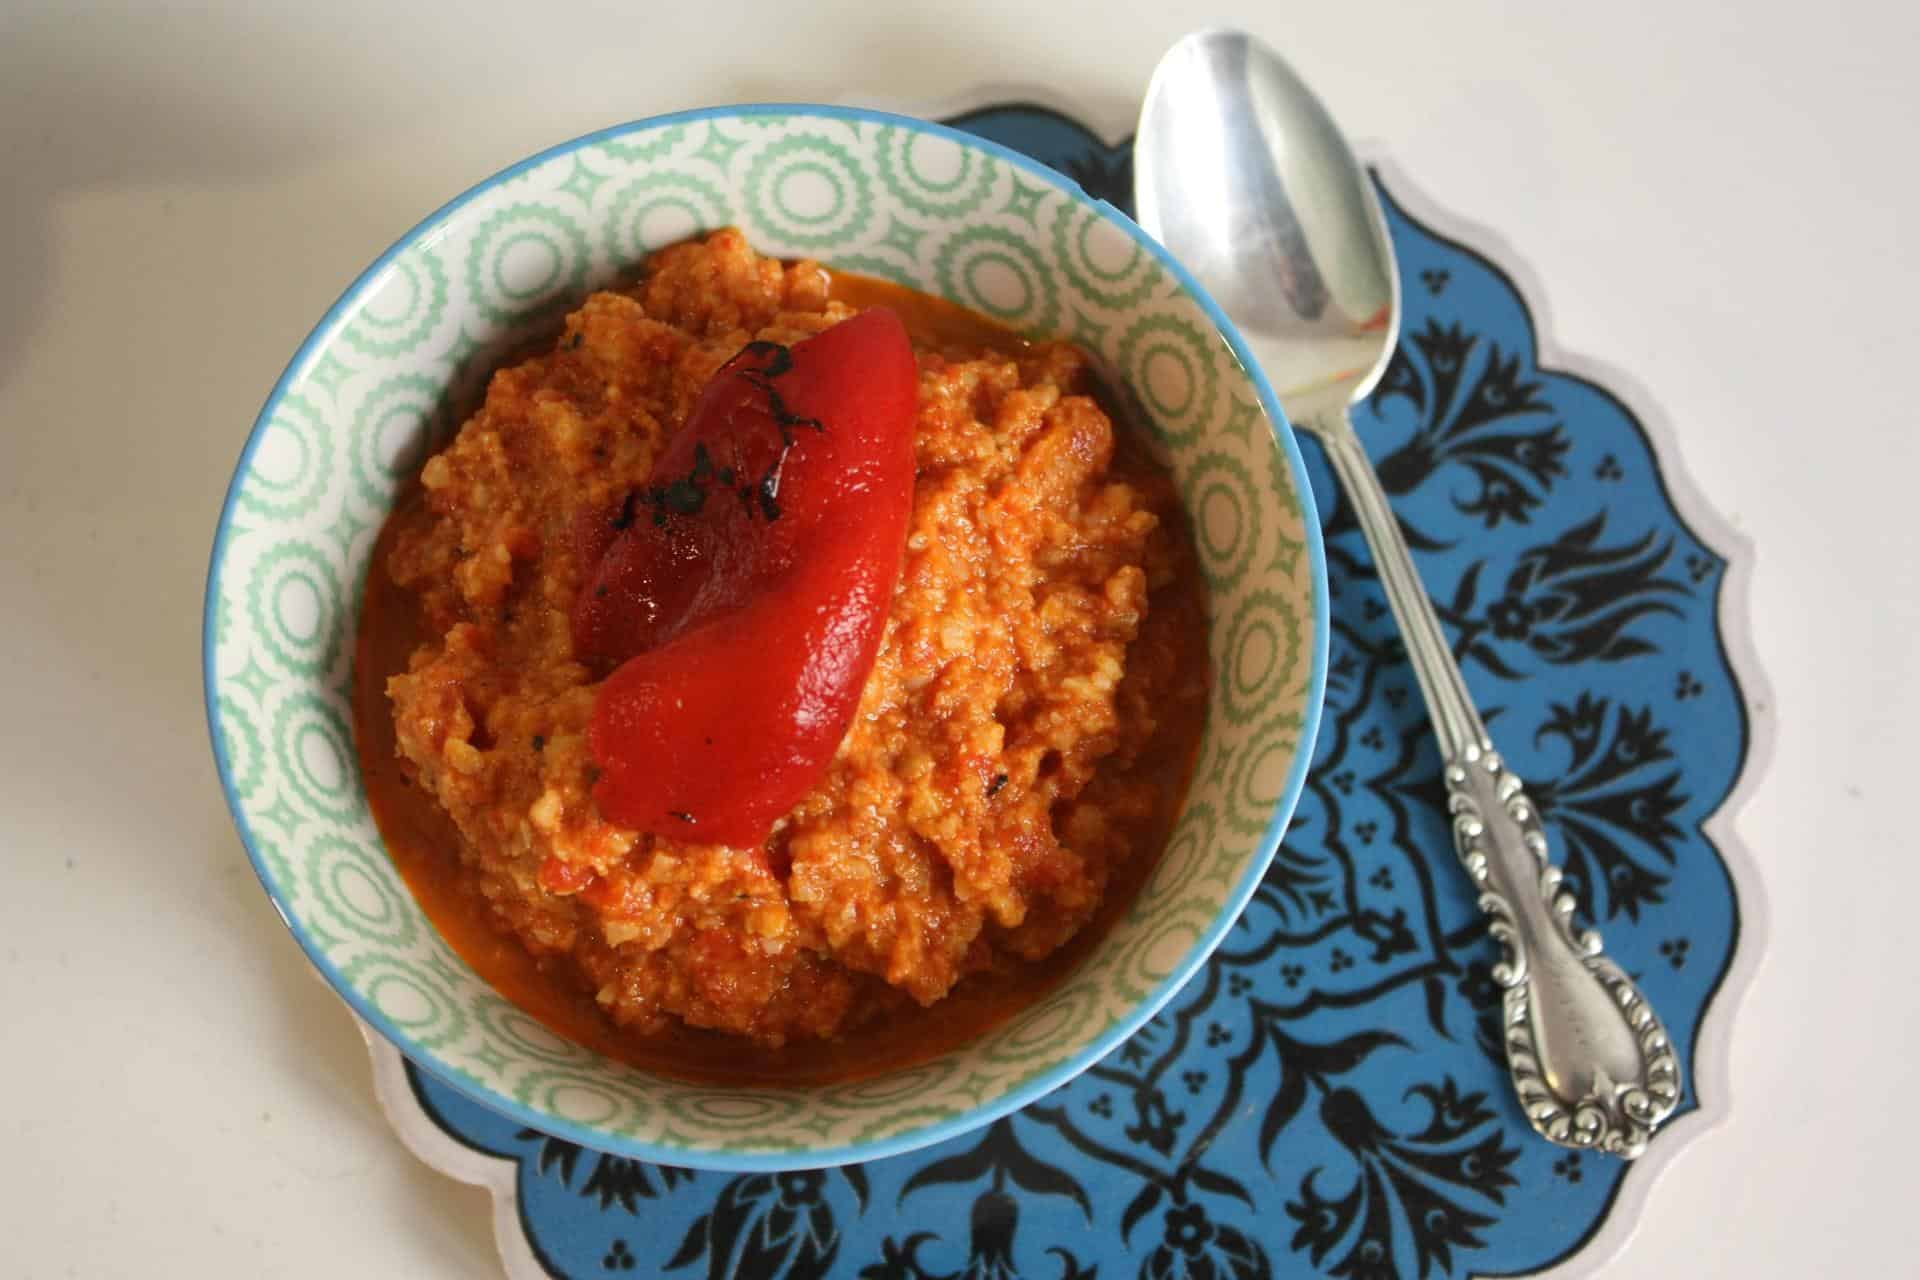 Romeso sauce (Spanish roasted red pepper and almond dip)